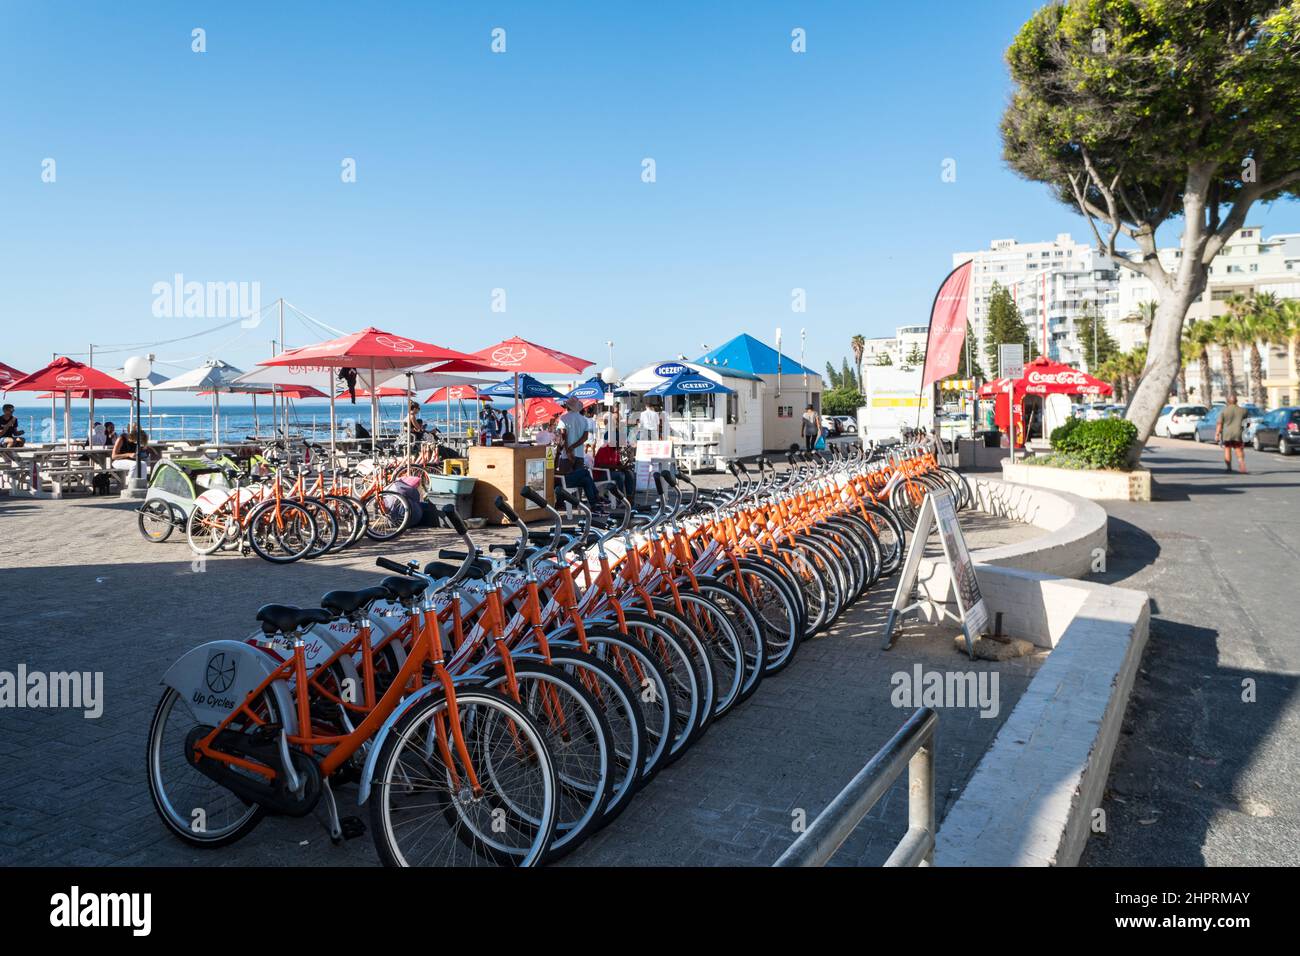 bicycle hire, rent a bike, row of cycles lined up on a beachfront road in Sea Point, Cape Town, South Africa concept recreational or leisure activity Stock Photo